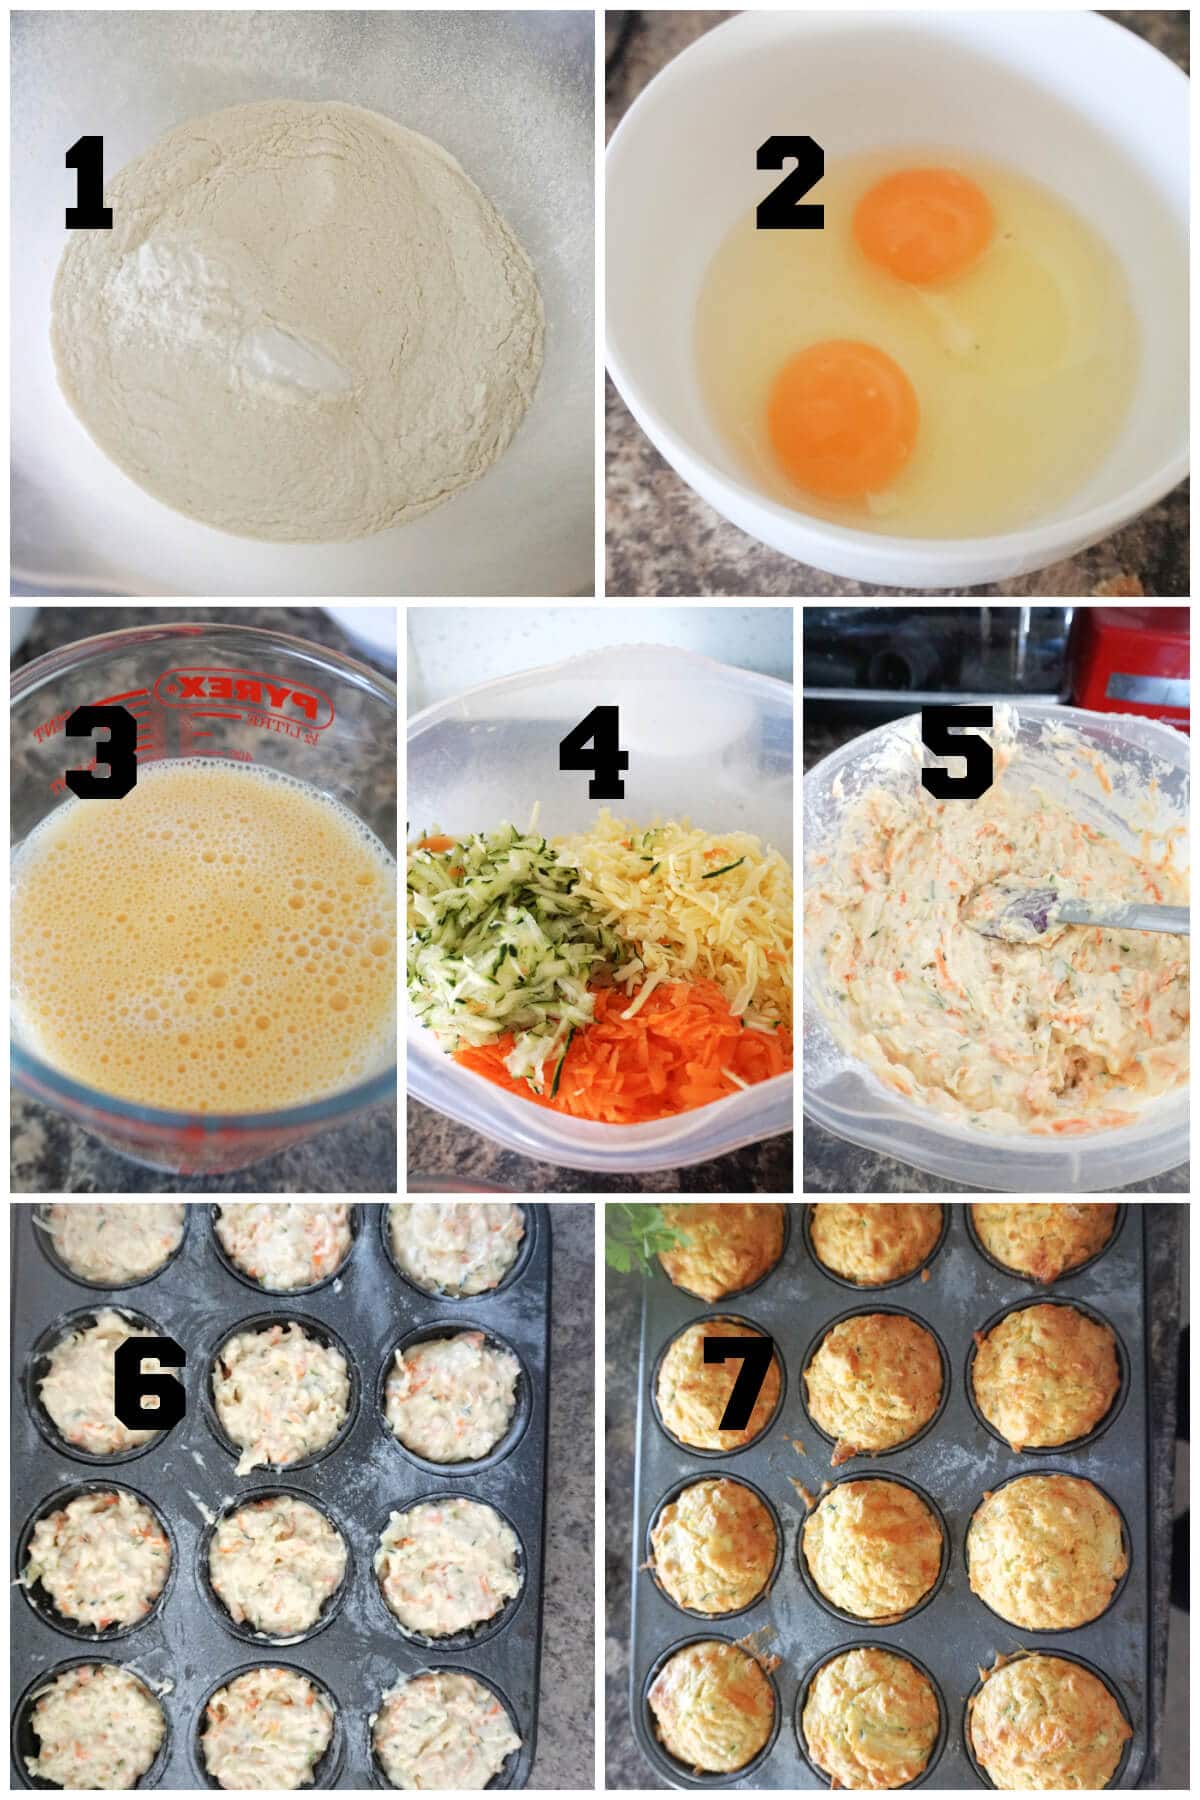 Collage of 7 photos to show how to make cheesy carrot and courgette muffins.